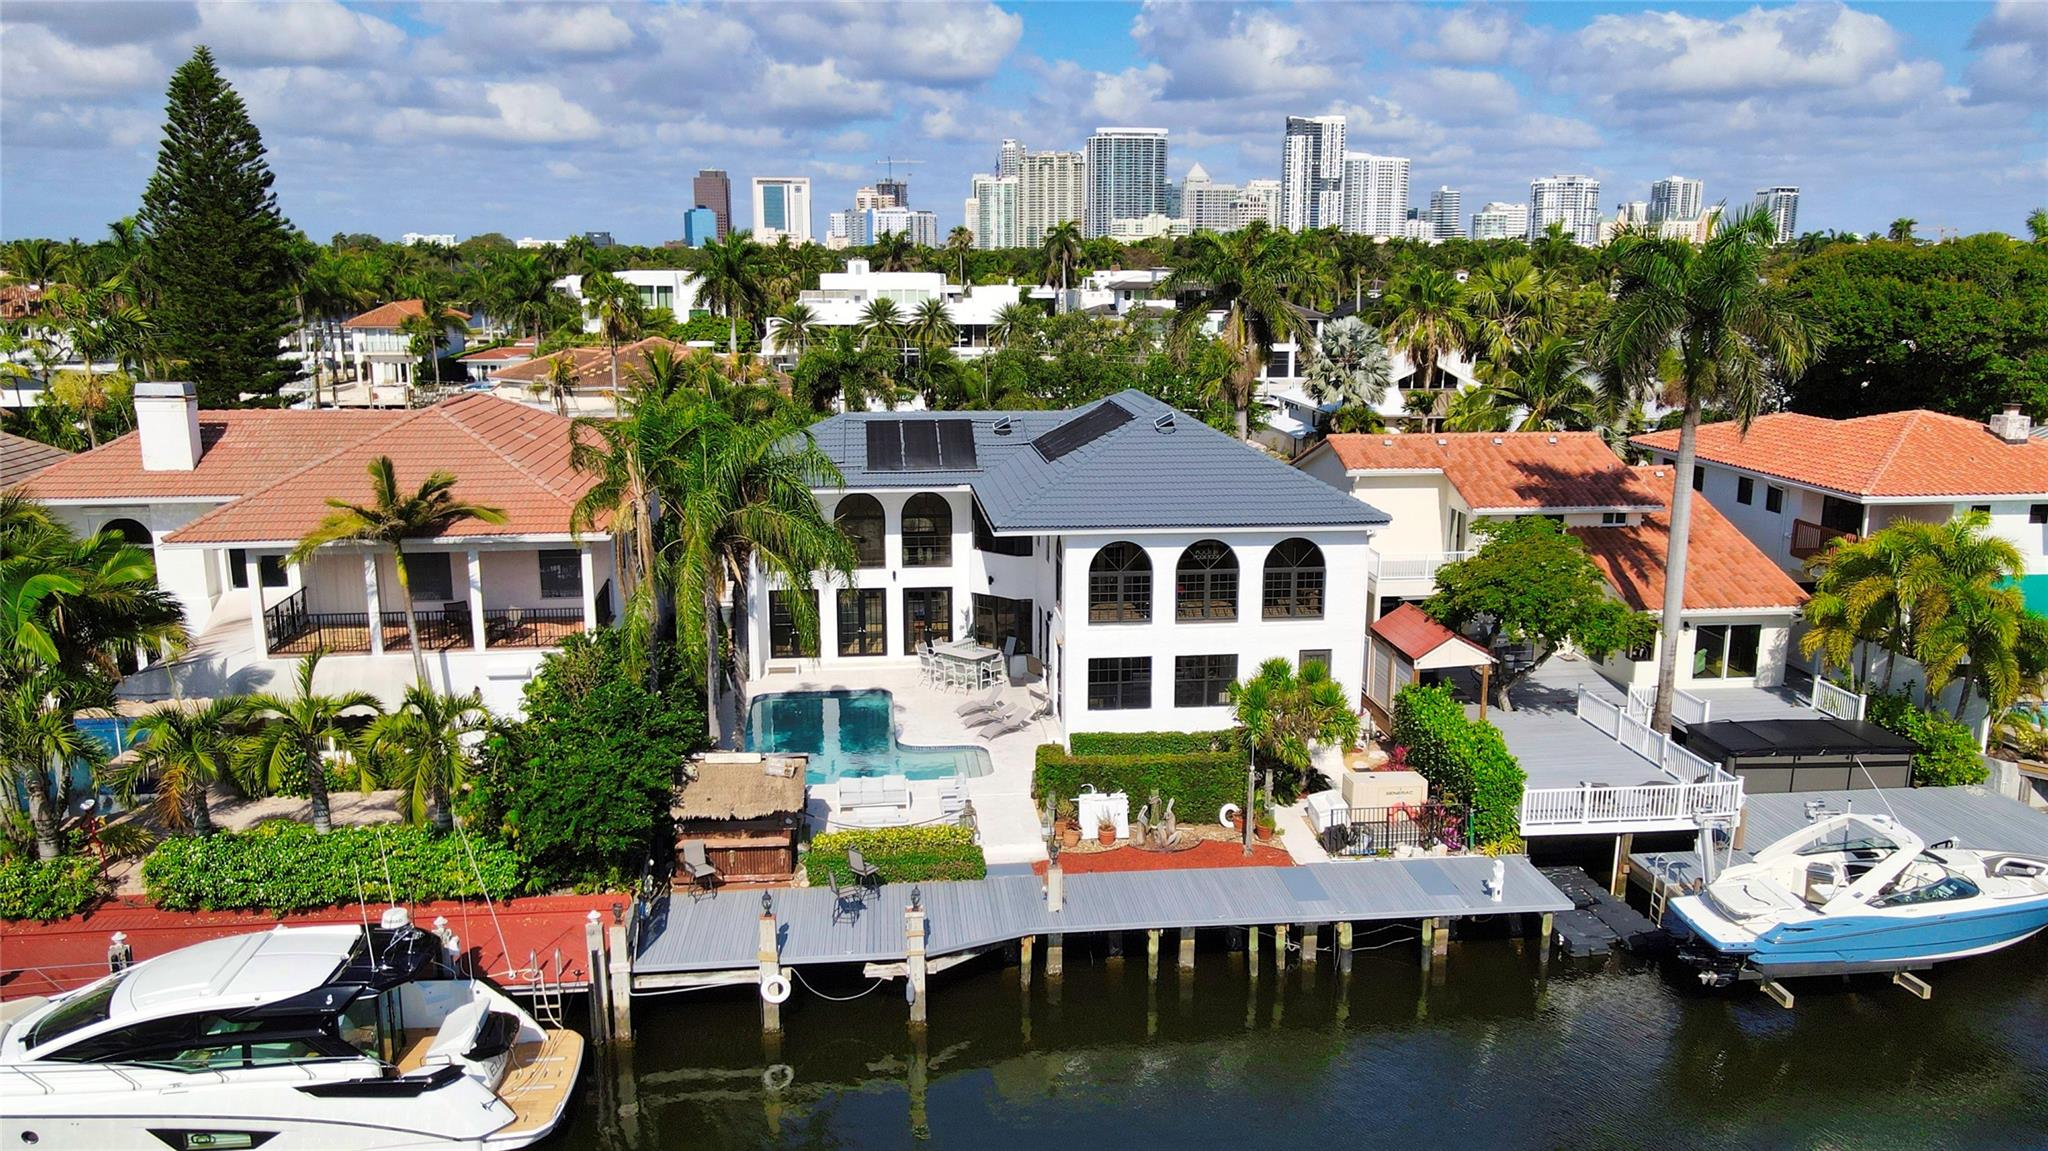 Sited on 70 ft +/- of Deepwater Dockage on the South side of Las Olas, offering quick access to Port Everglades by boat, this reimagined 5 Bedroom, 3 Full Bathroom, 1 Half Bathroom Coastal Residence boasts over 4,050 sqft of living space, with soaring ceilings, an open floor plan, and direct water views from every major room. Designed for entertaining, a grand living room leads to the open kitchen and waterside family room. French doors open to a large pool, jacuzzi, tiki bar/grill and new composite dock. Upstairs is dedicated to the owners suite, offering a huge bedroom with vaulted ceilings, nicely appointed master bath, a bonus loft or office, and a covered terrace with beautiful views down the canal. Other features include a cabana bath and a 2 car garage.